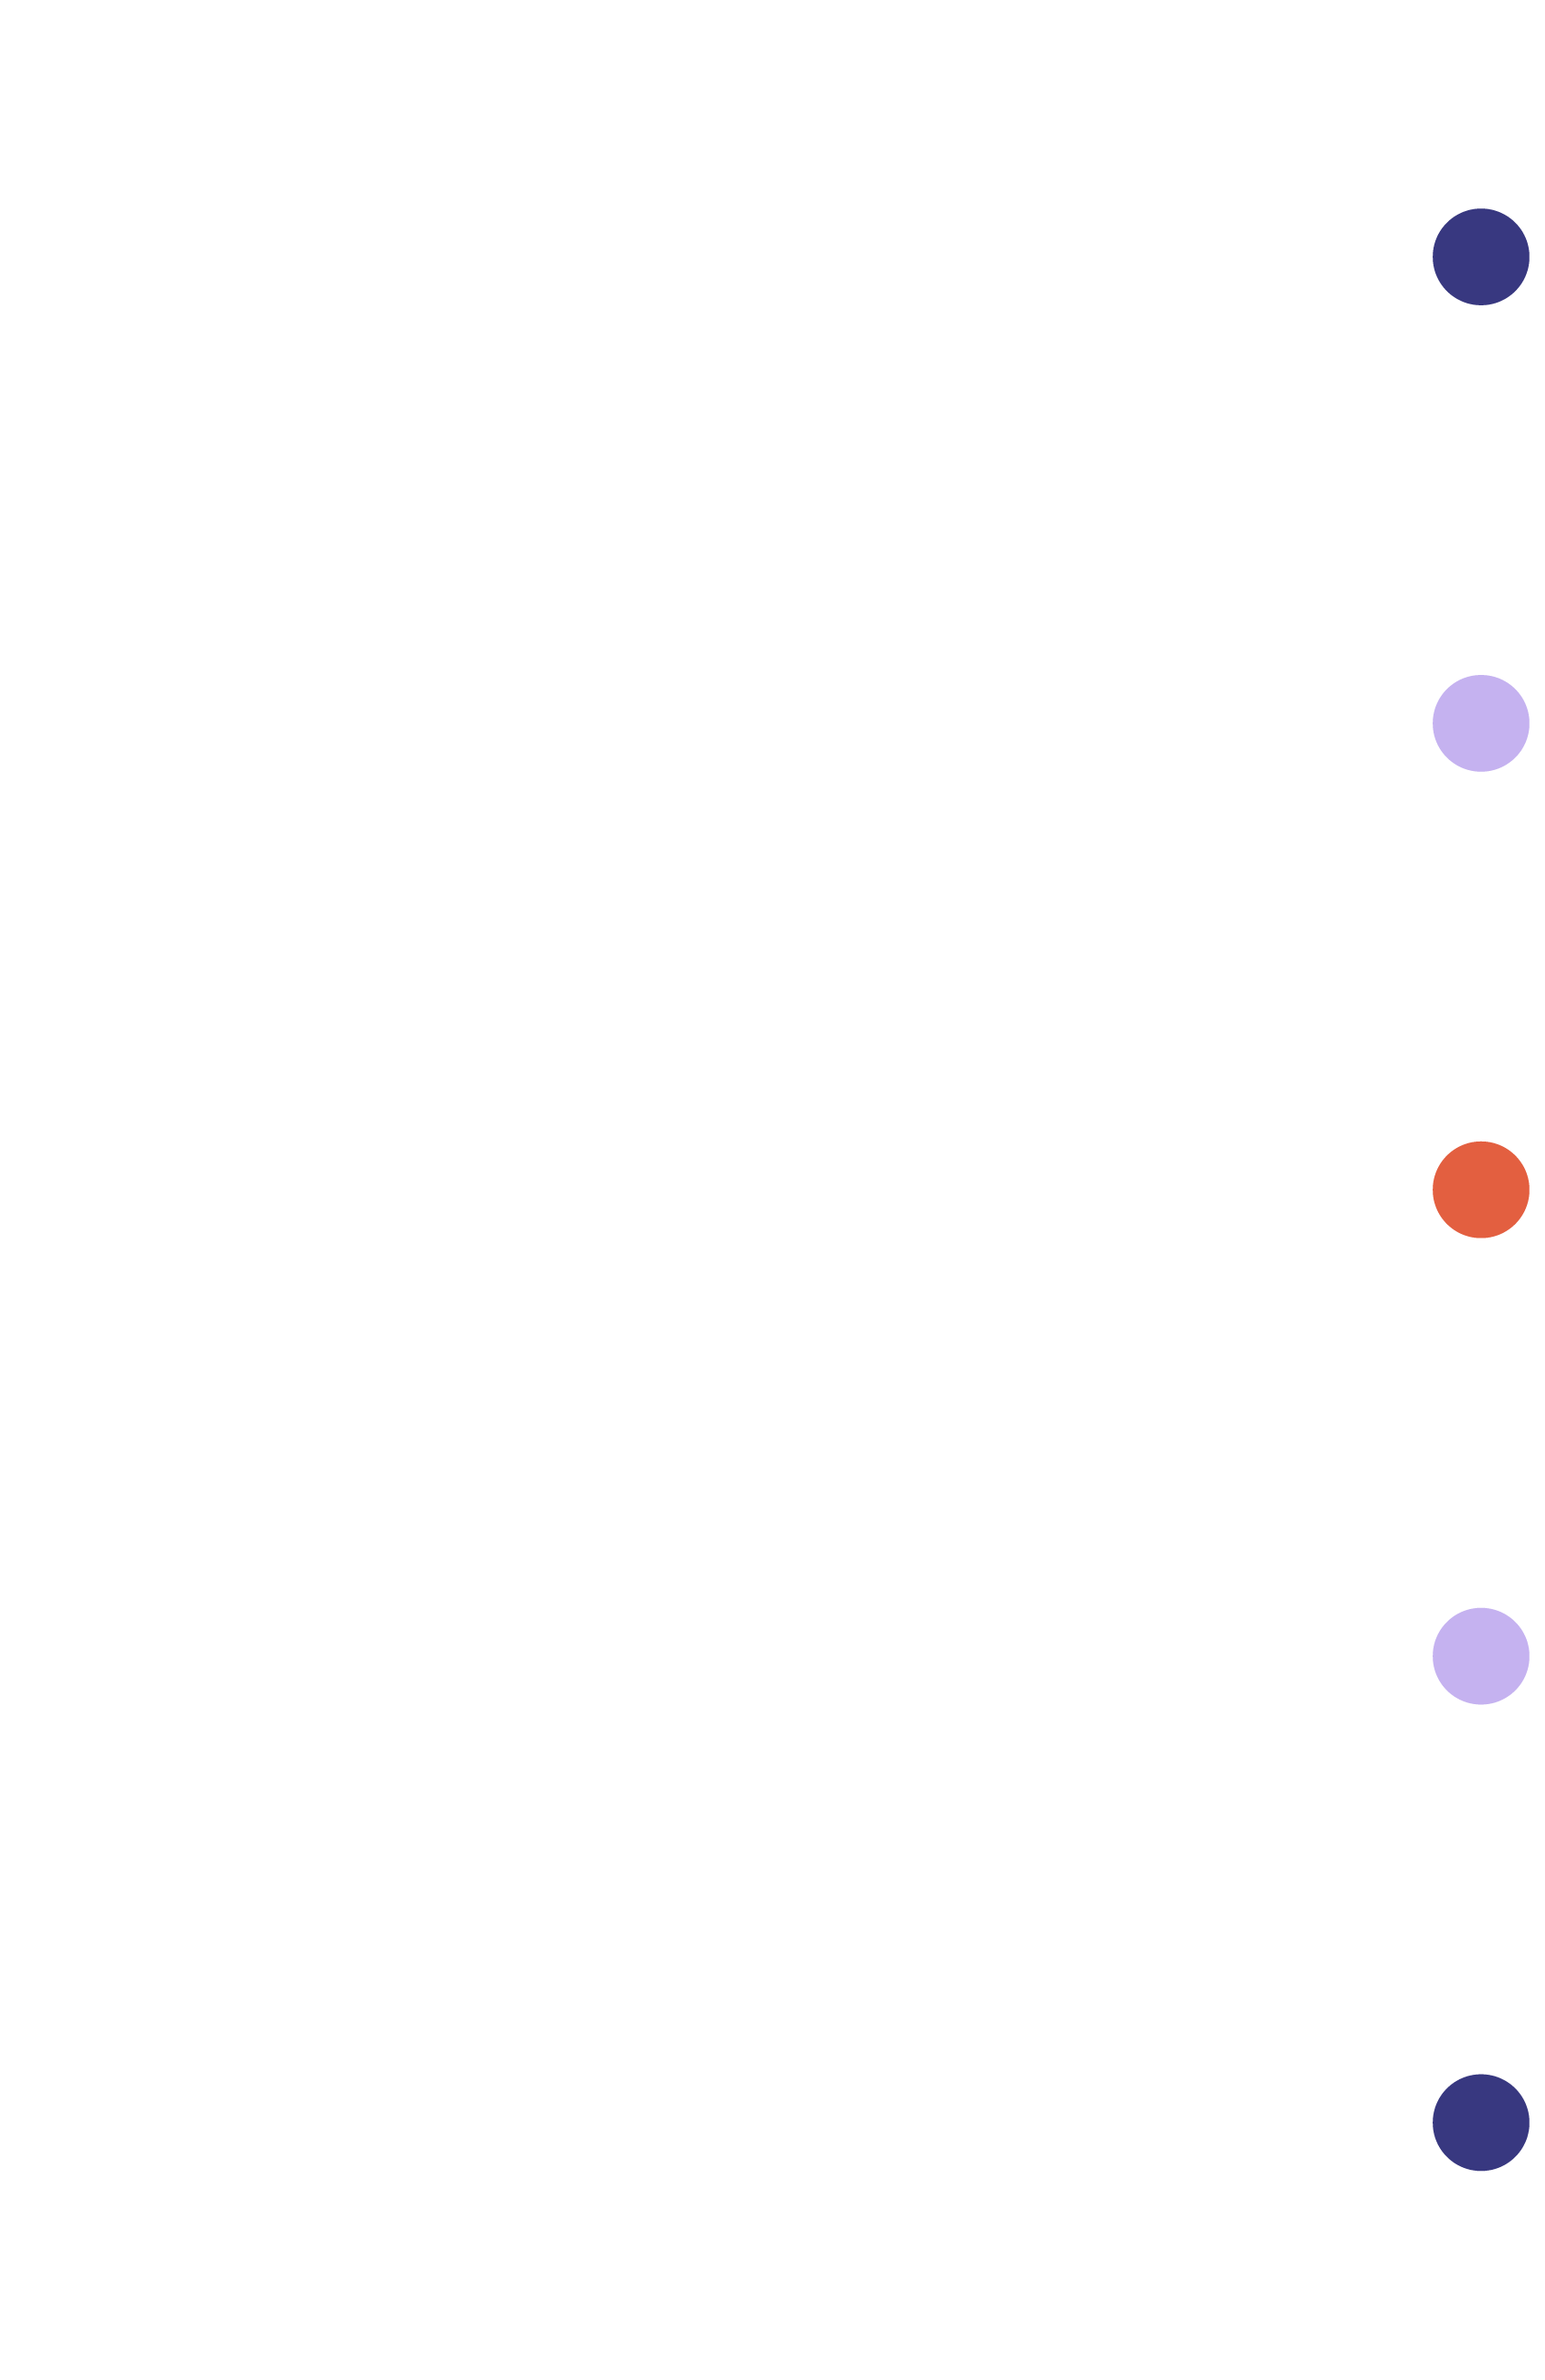 Graphic showing Rudow & Star's services: Digital Strategy, Paid Media, Analytics & Reporting, SEO, and Design & Creative.